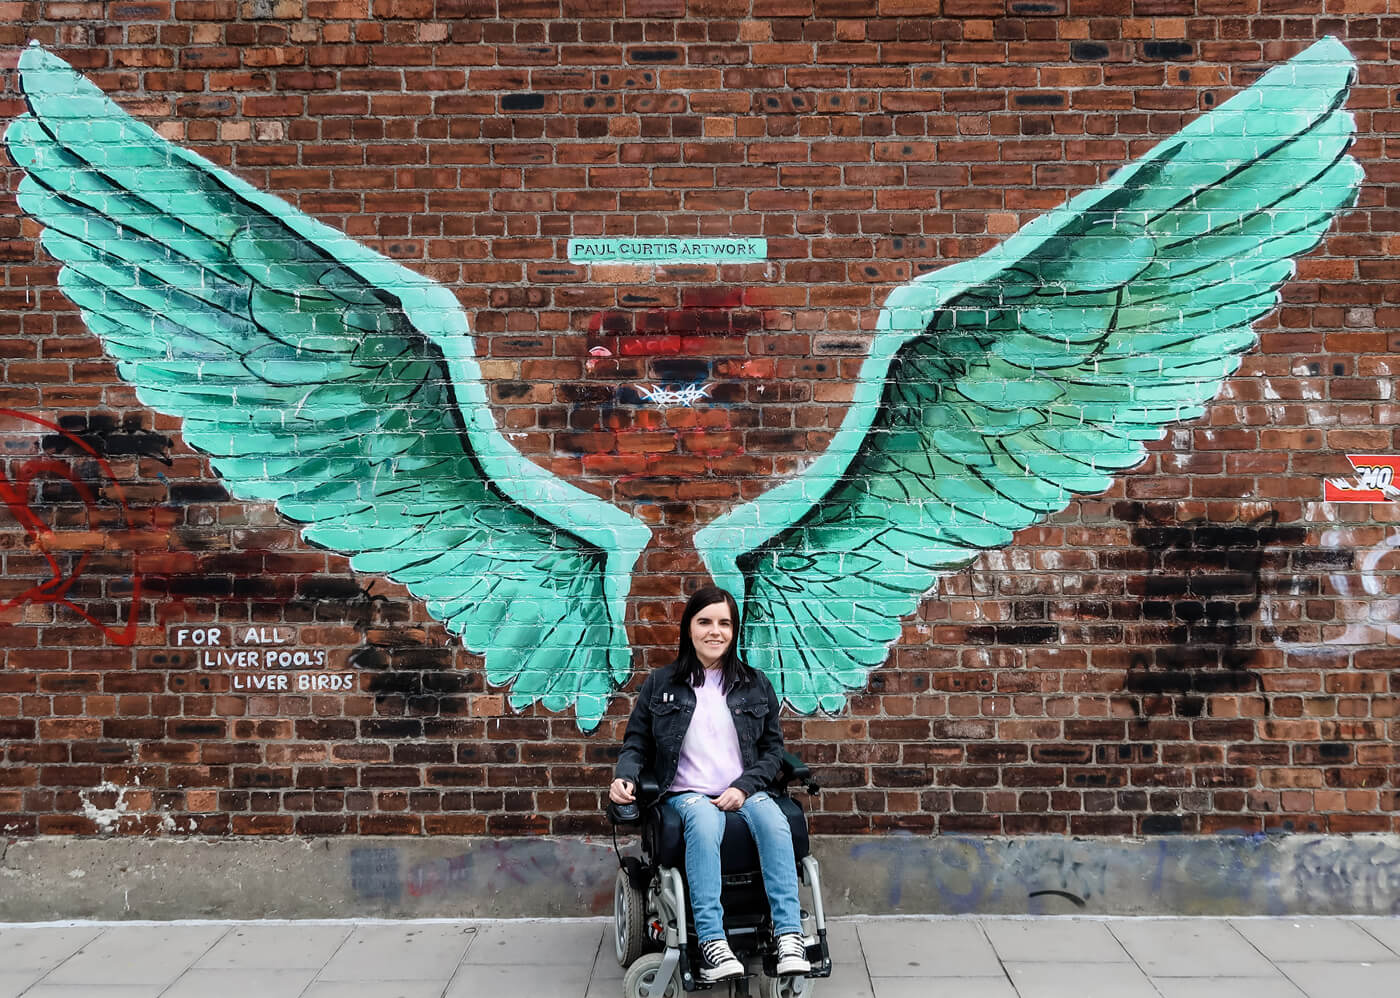 Emma sitting in her wheelchair against a brick wall. The wall has giant green angel wings spray painted on it by artist Paul Curtis.